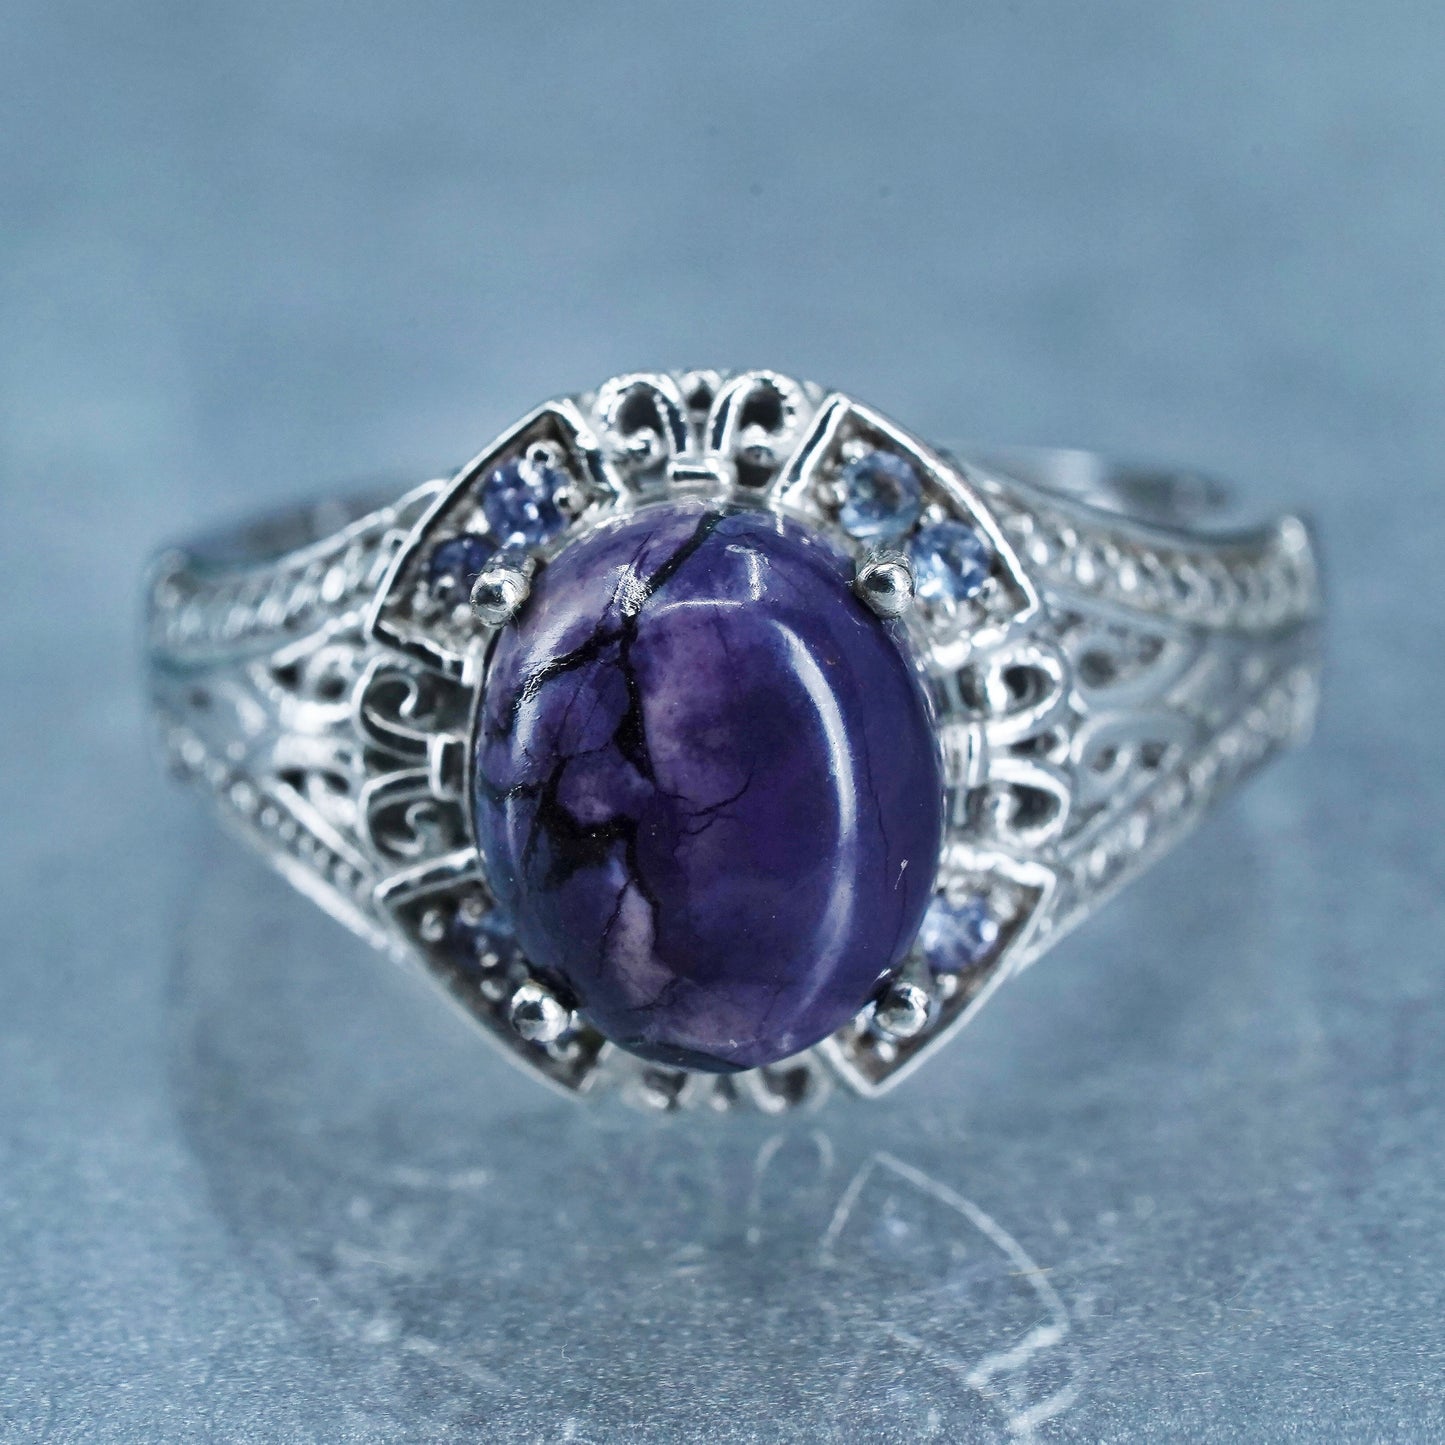 Size 10, Sterling 925 silver handmade ring with opalizted fluorite and amethyst